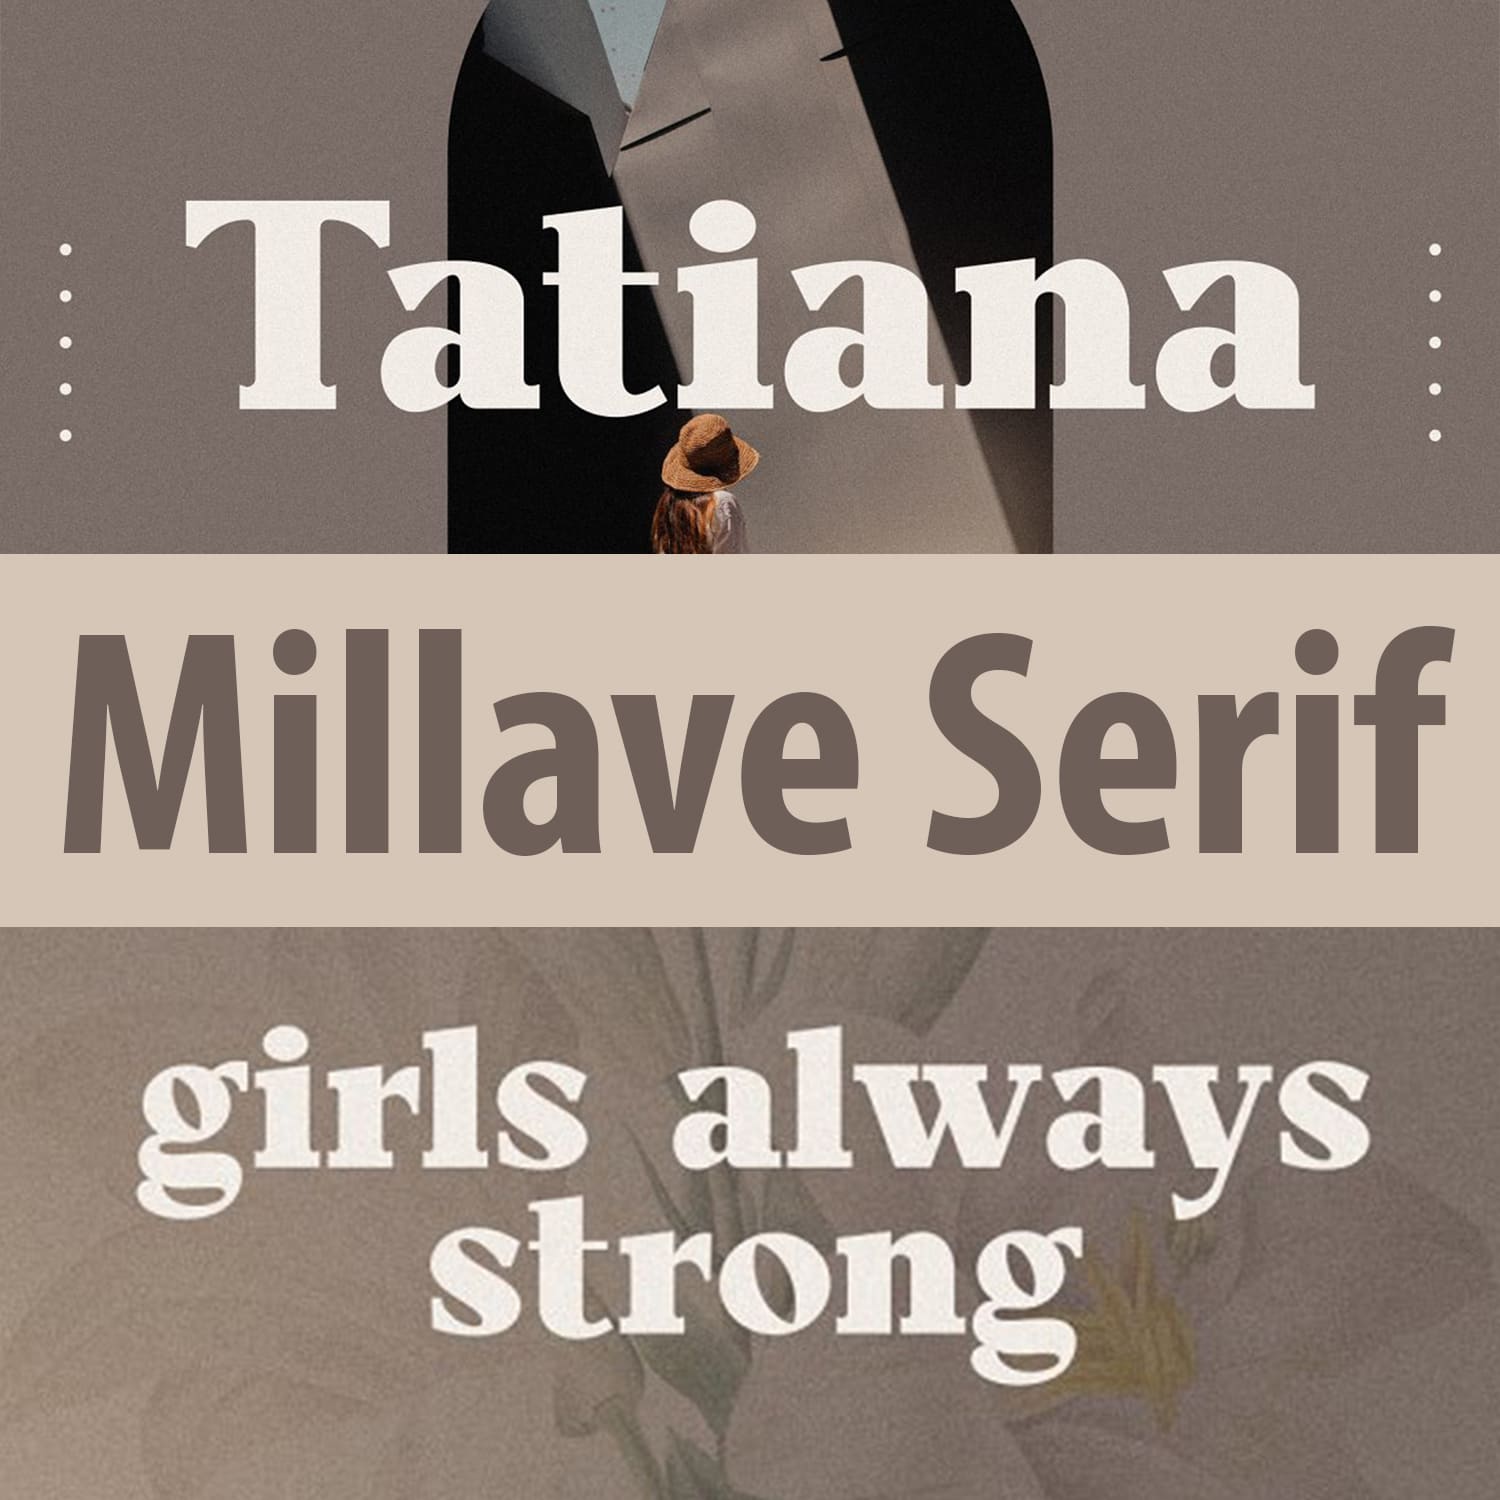 Millave Serif Preview - A Bold Serif Font"Girls Always Strong".